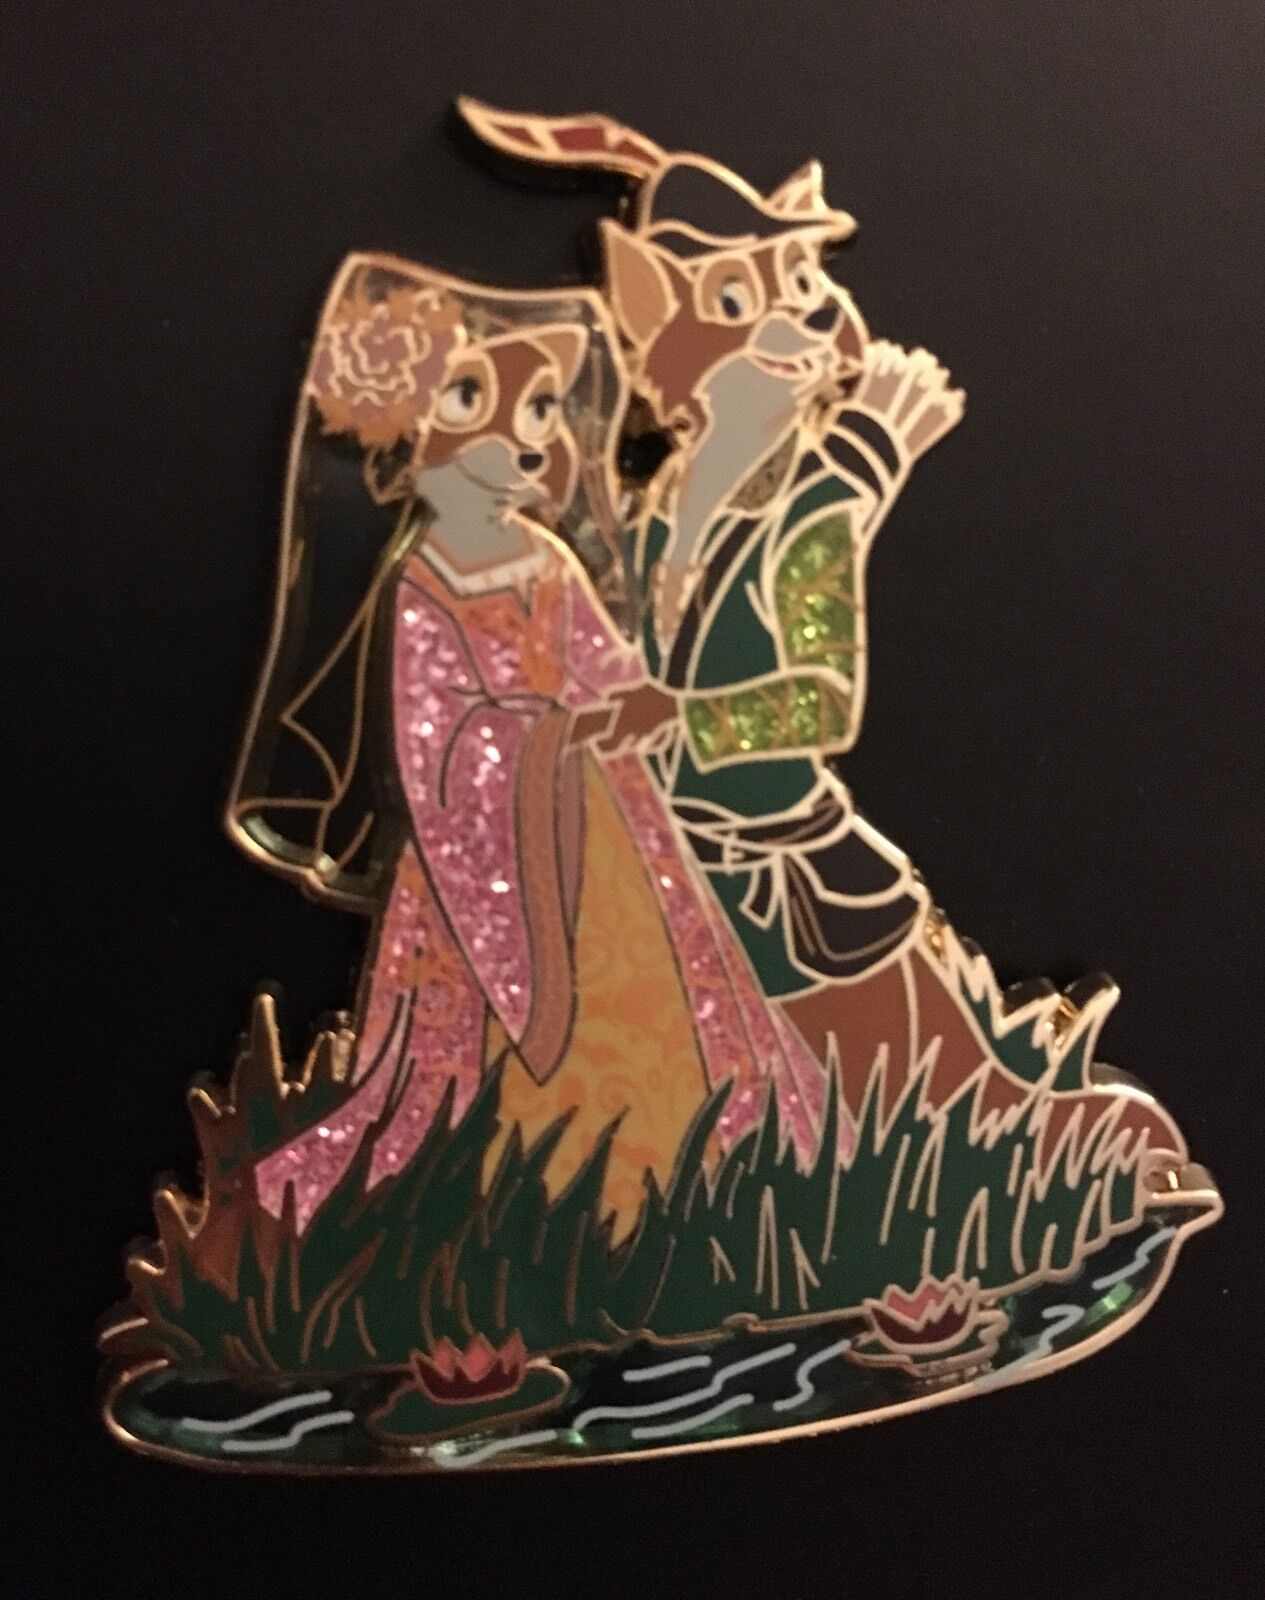 ROBIN HOOD DISNEY D23 EXPO EXCLUSIVE EVENT 2017 DESIGNER DOLL COLLECTION PIN